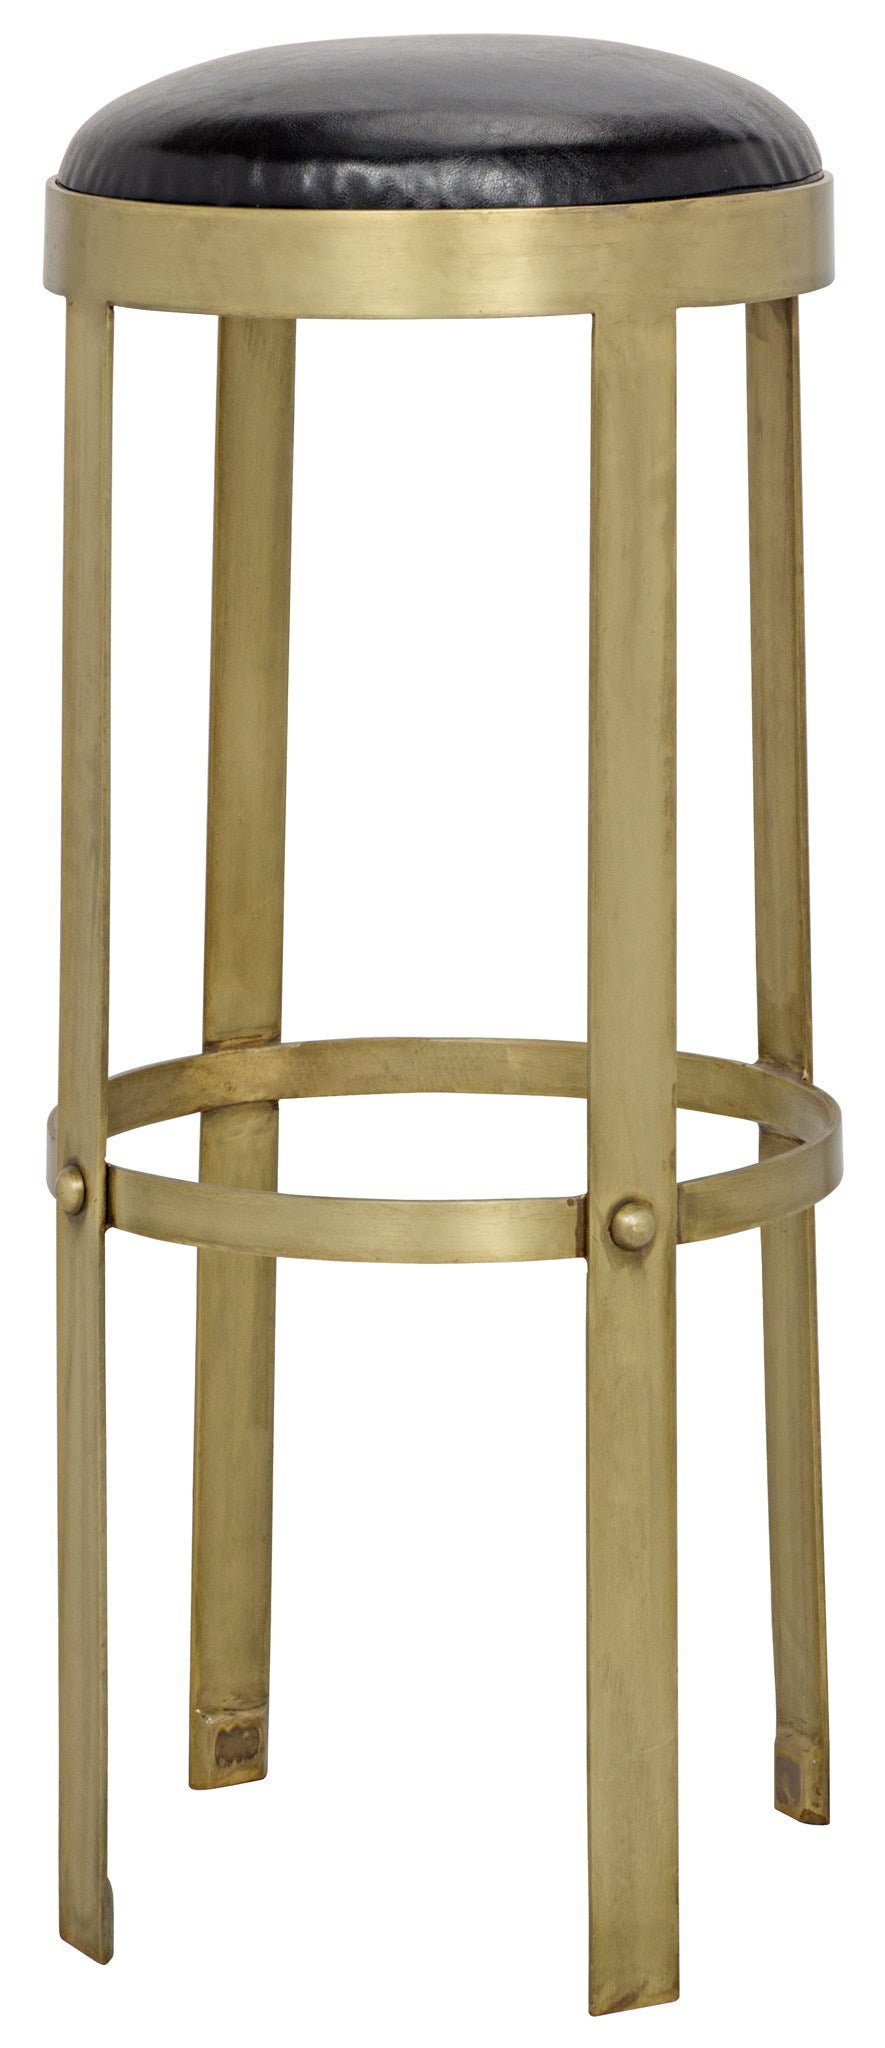 Prince Stool with Leather, Brass Finish - Furniture - Tipplergoods